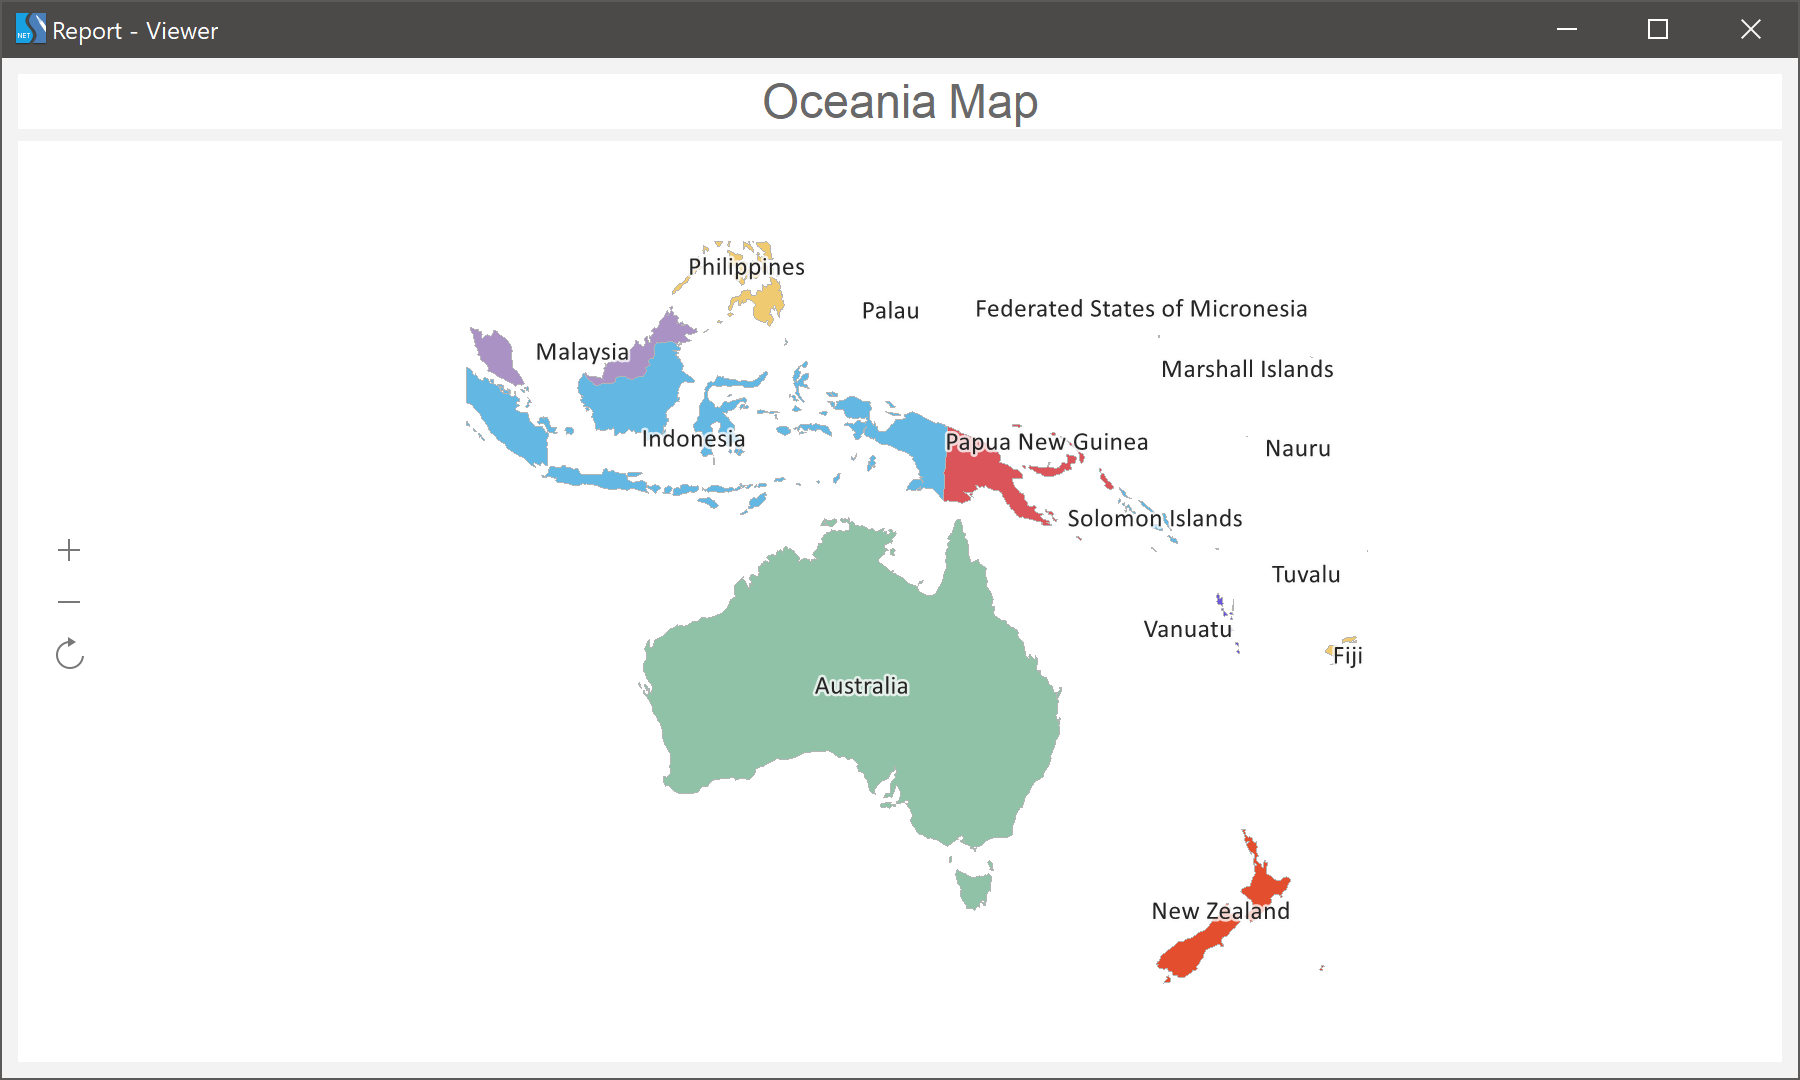 The new map - Oceania